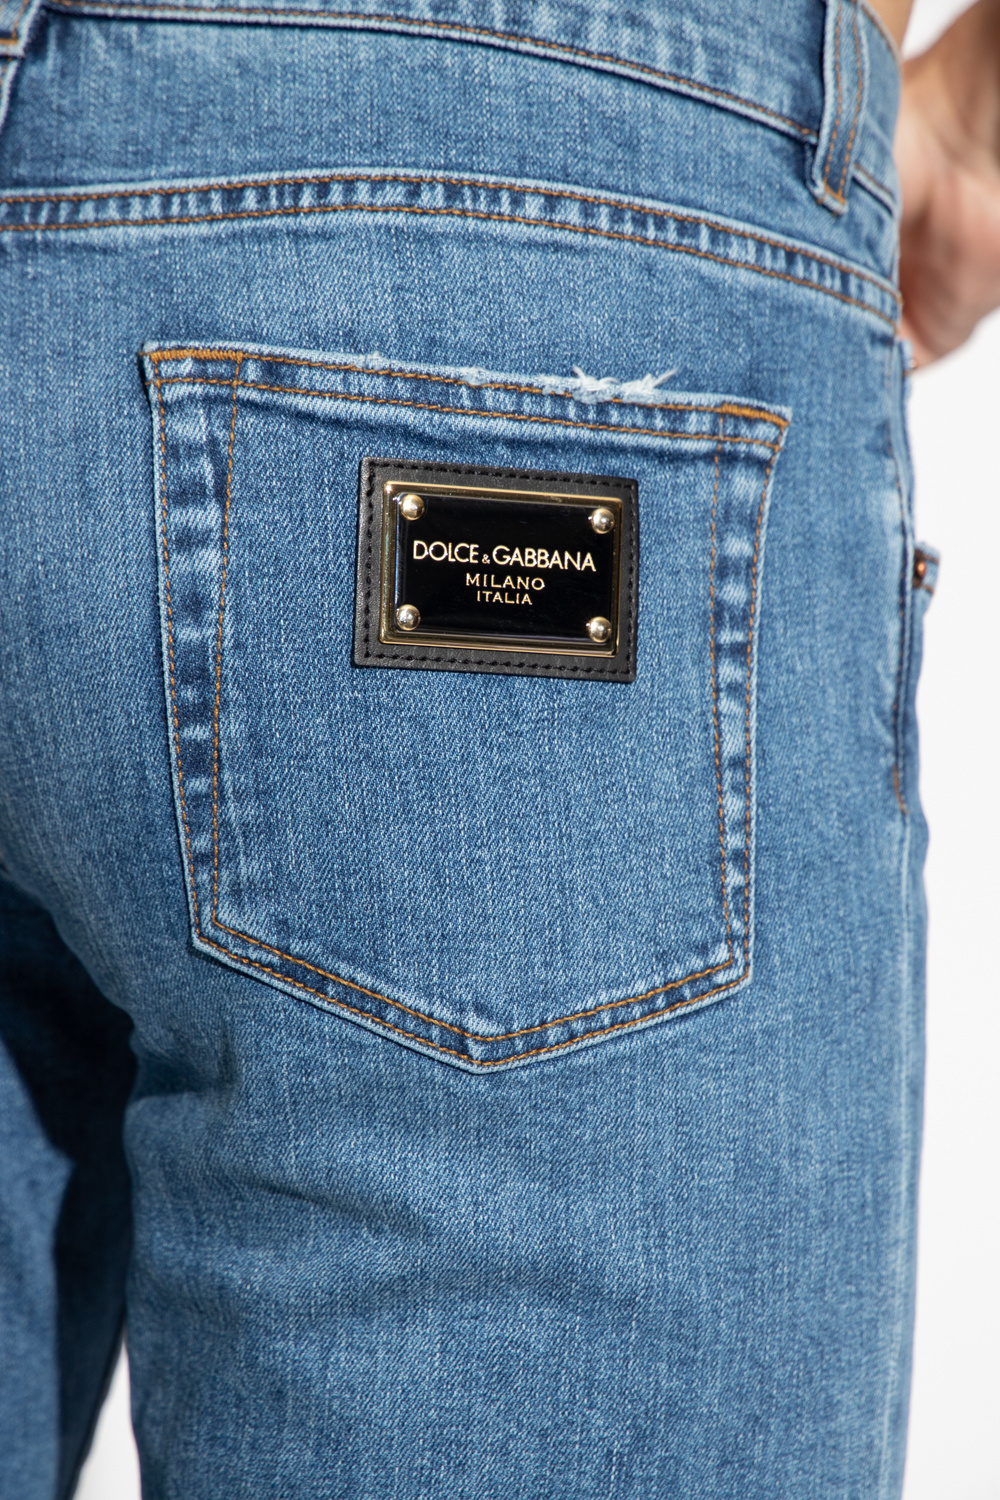 jeans dolce e gabbana outlet, deep discount Save 81% available - www ...